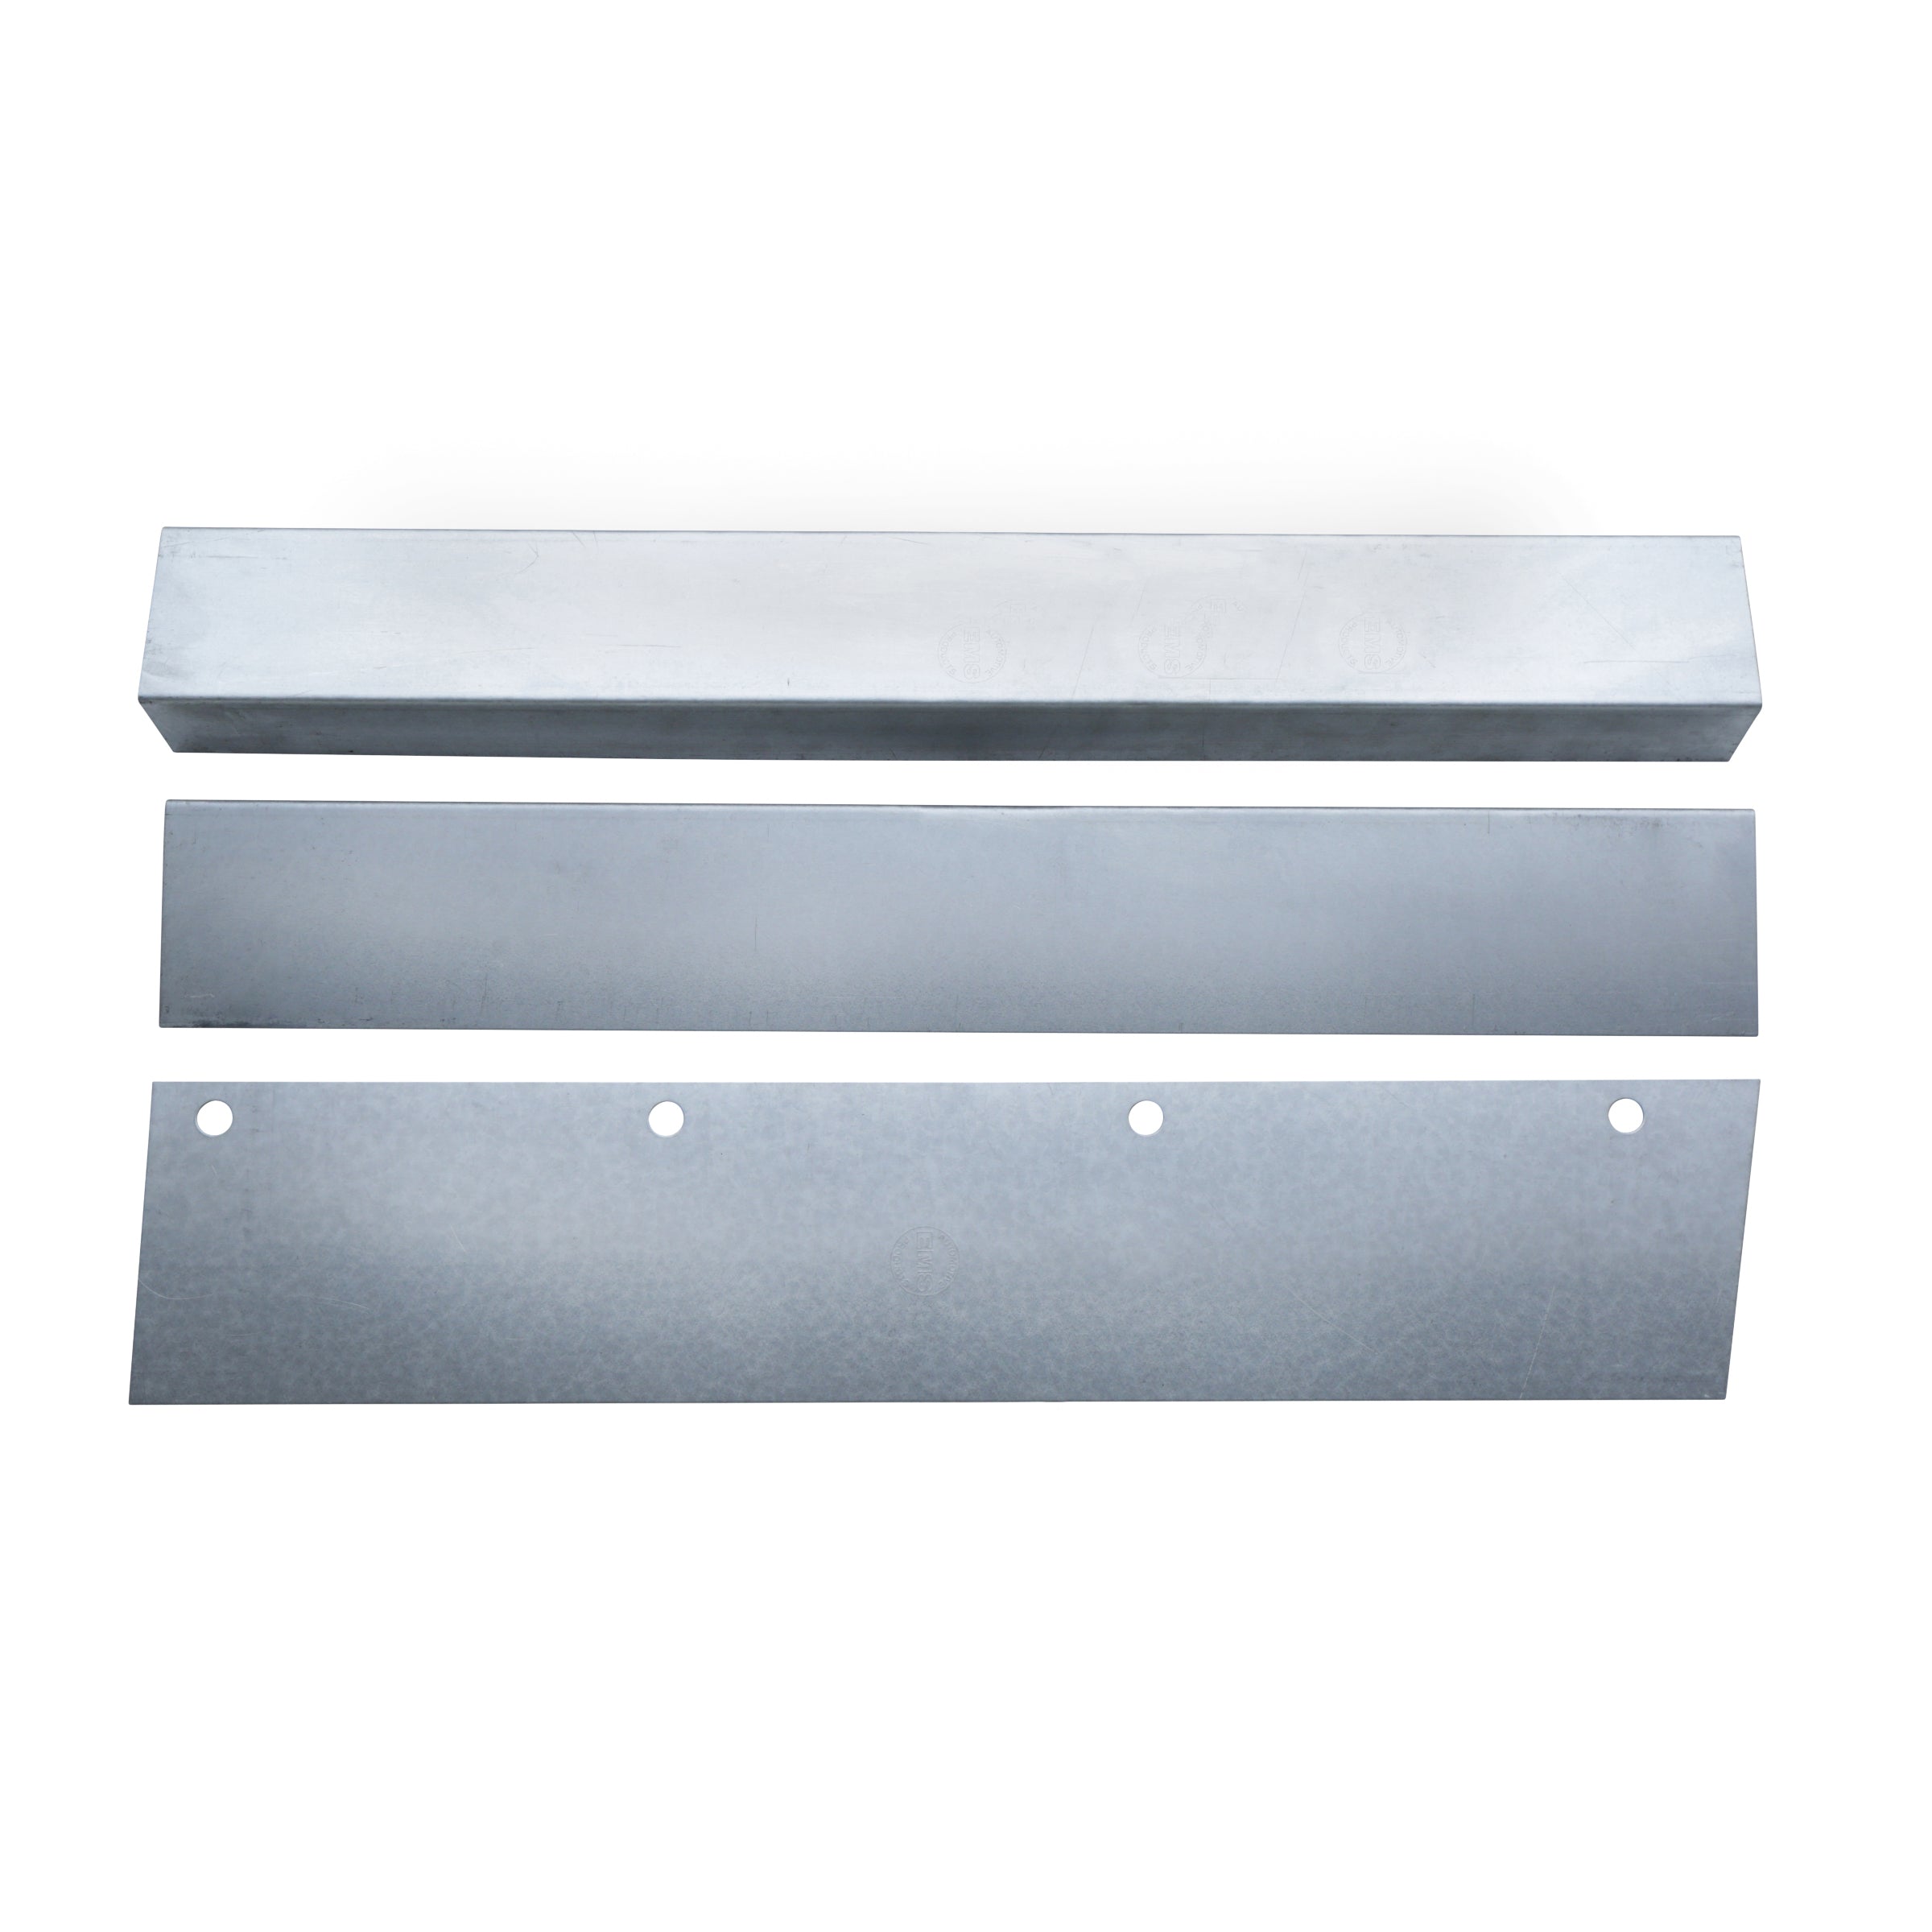 Rocker Panel Box (Rear, Left) • 1941-48 Ford & Mercury Fordor, Business Coupe, & Sedan Delivery